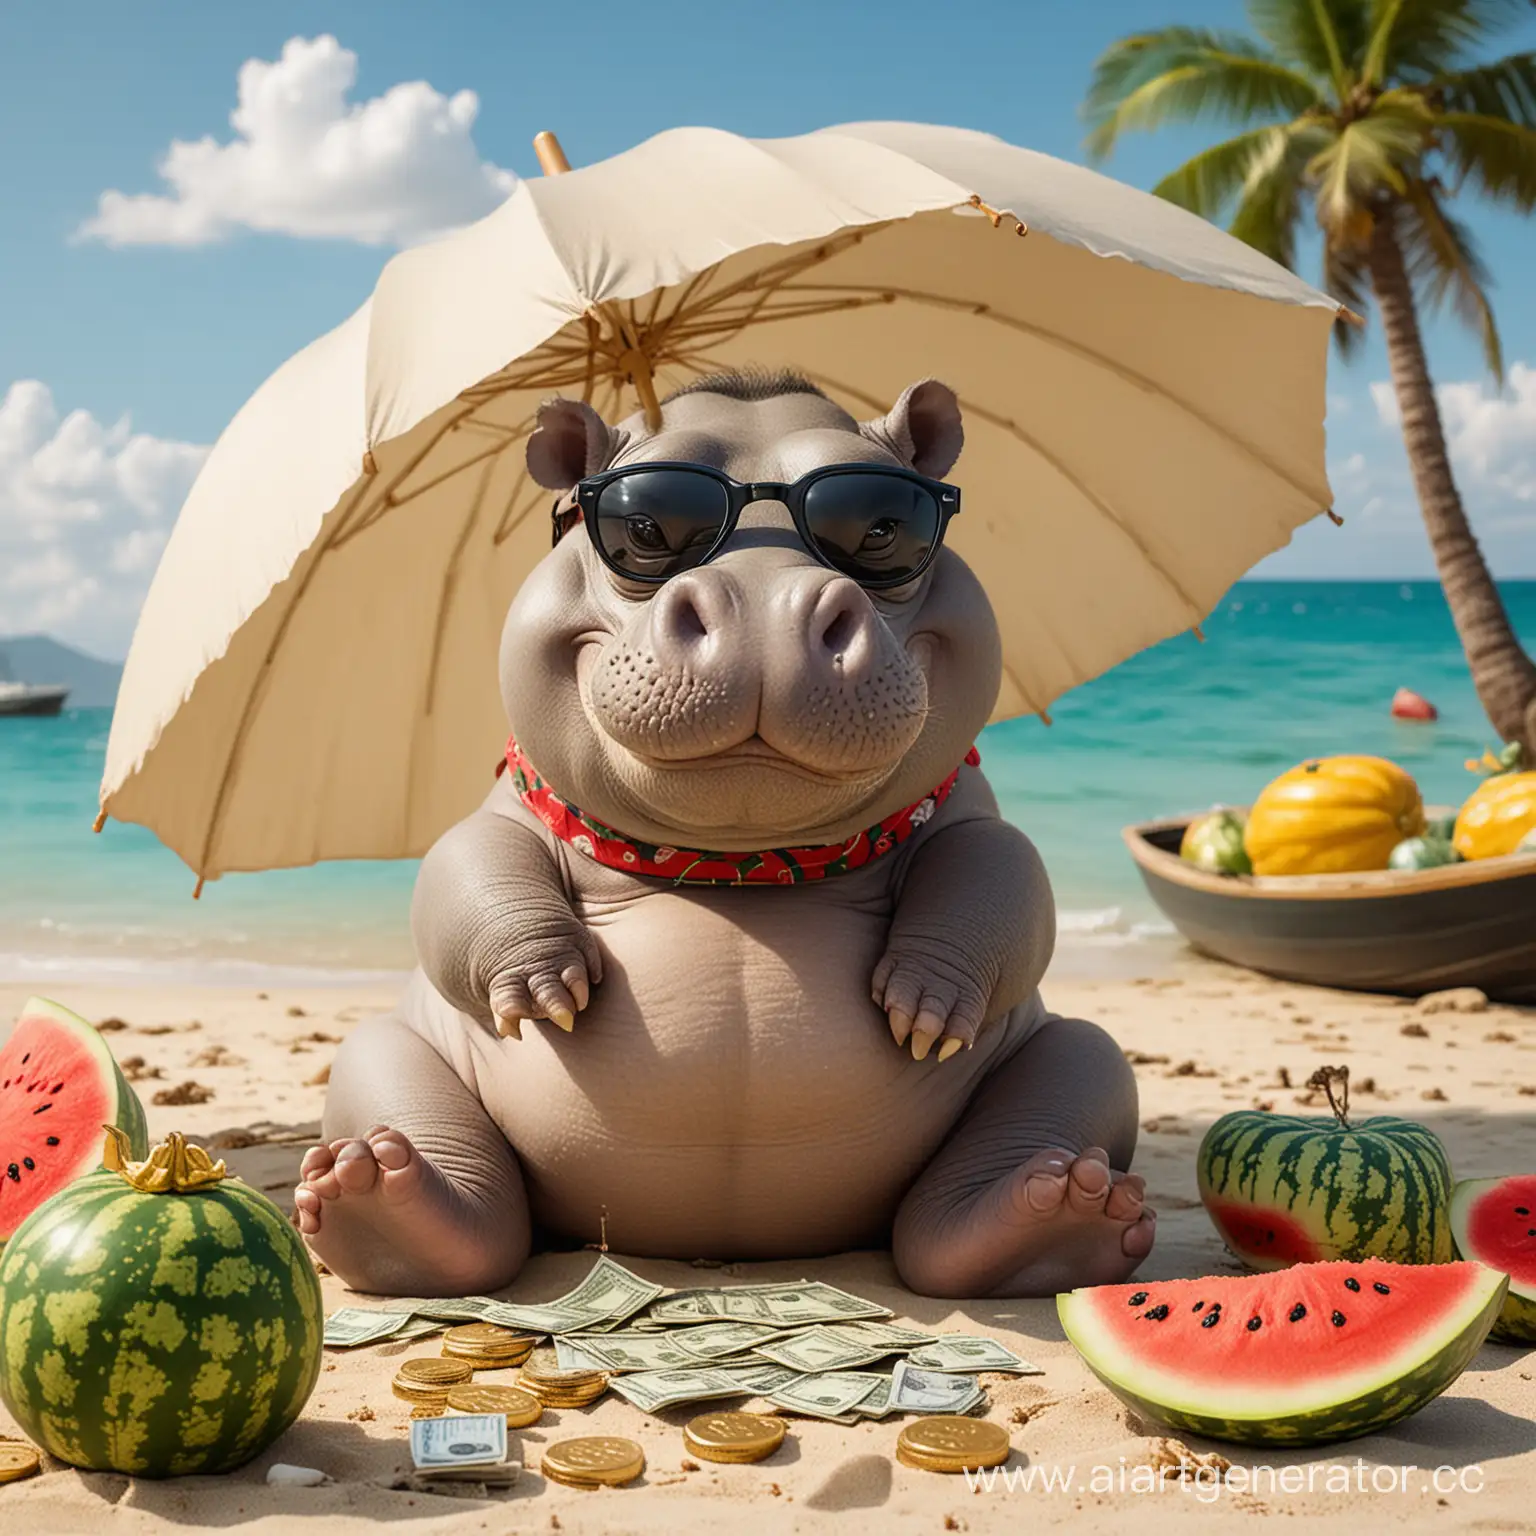 A cute little hippo is lying on the beach under an umbrella. He wears black glasses and has a gold tooth. Watermelons are all around him. There is a boat on the sea behind him. There is a lot of money on the boat.